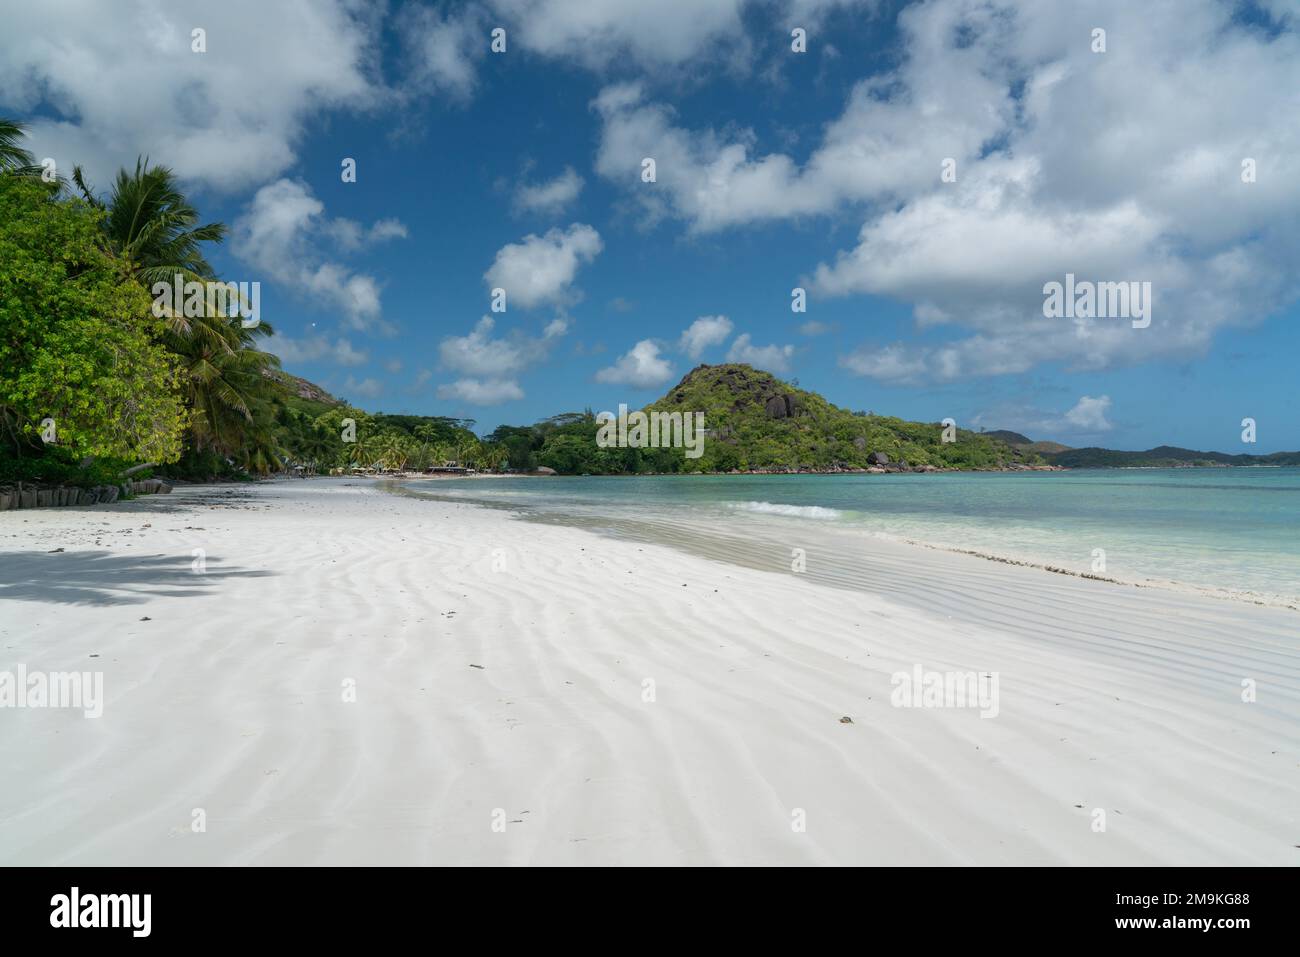 View along the long beach of Anse Volbert on the Seychelles. Stock Photo